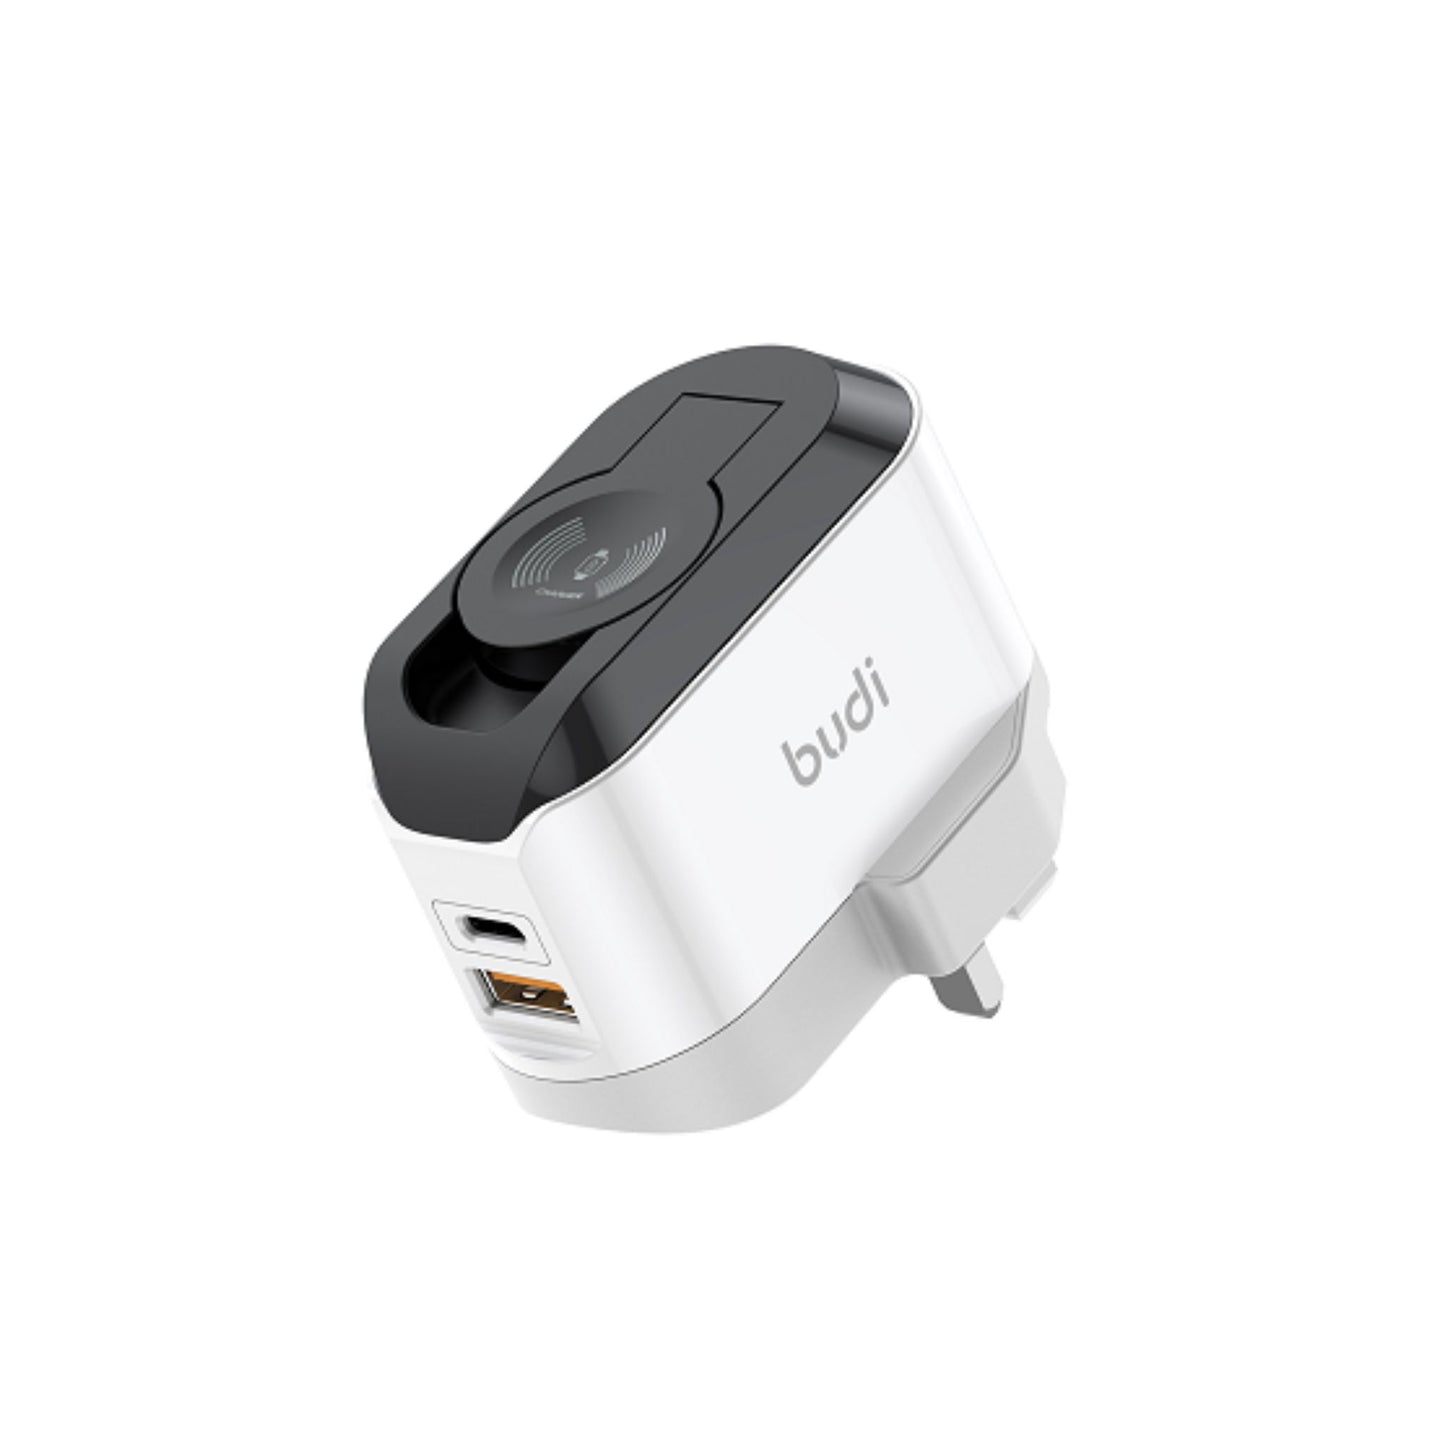 Budi 20W 3 in 1 Charger With Smart Watch Charger